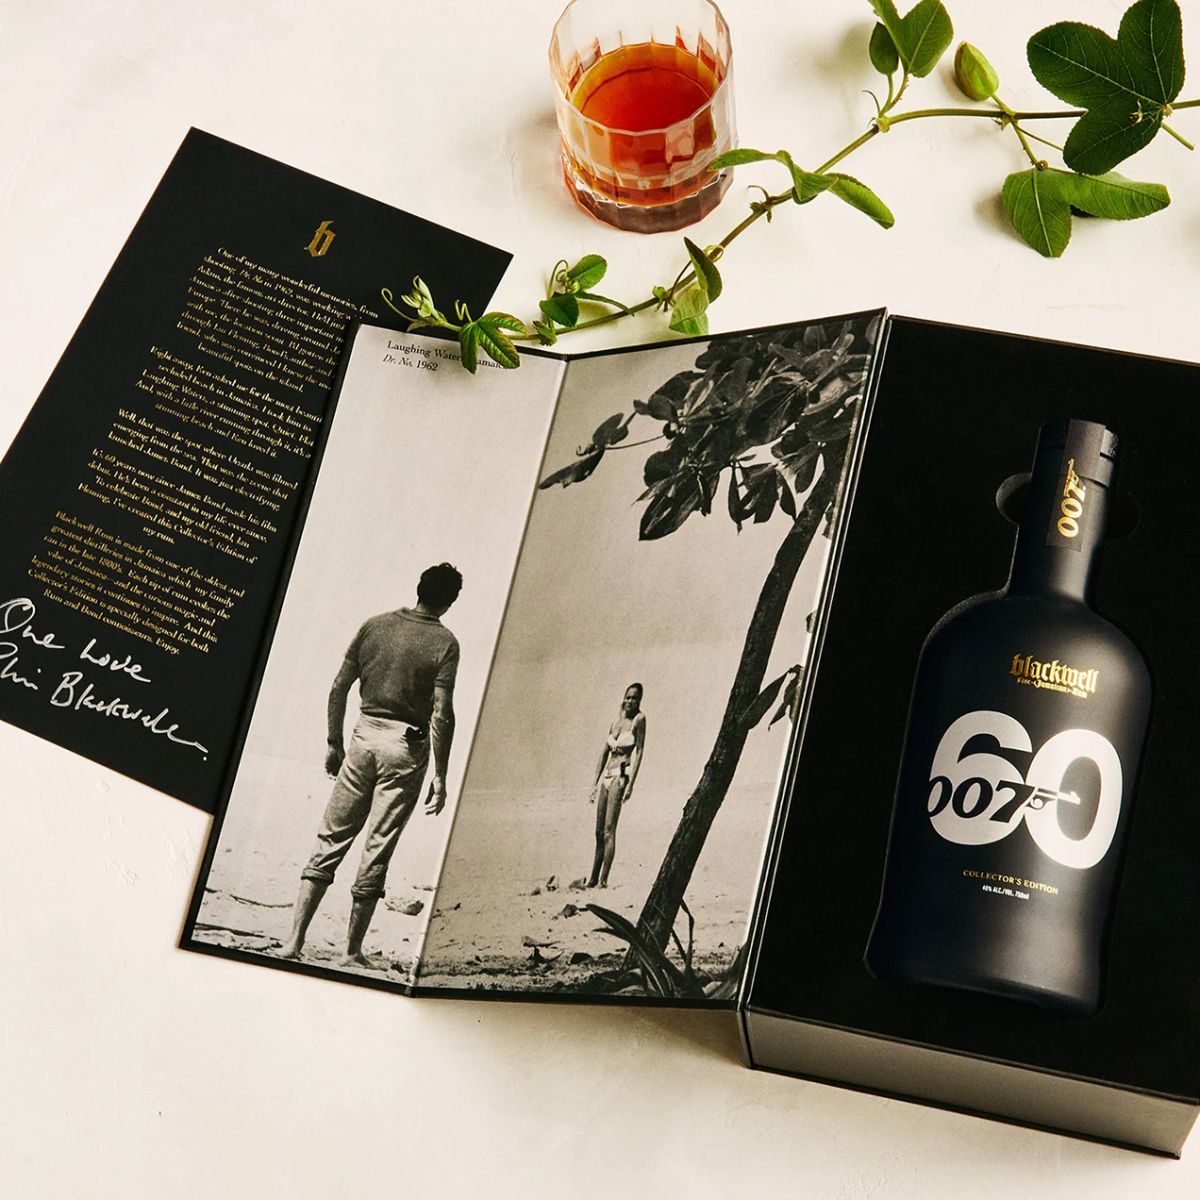 Blackwell Limited James Bond Jamaican Rum Signed and Numbered Edition 007